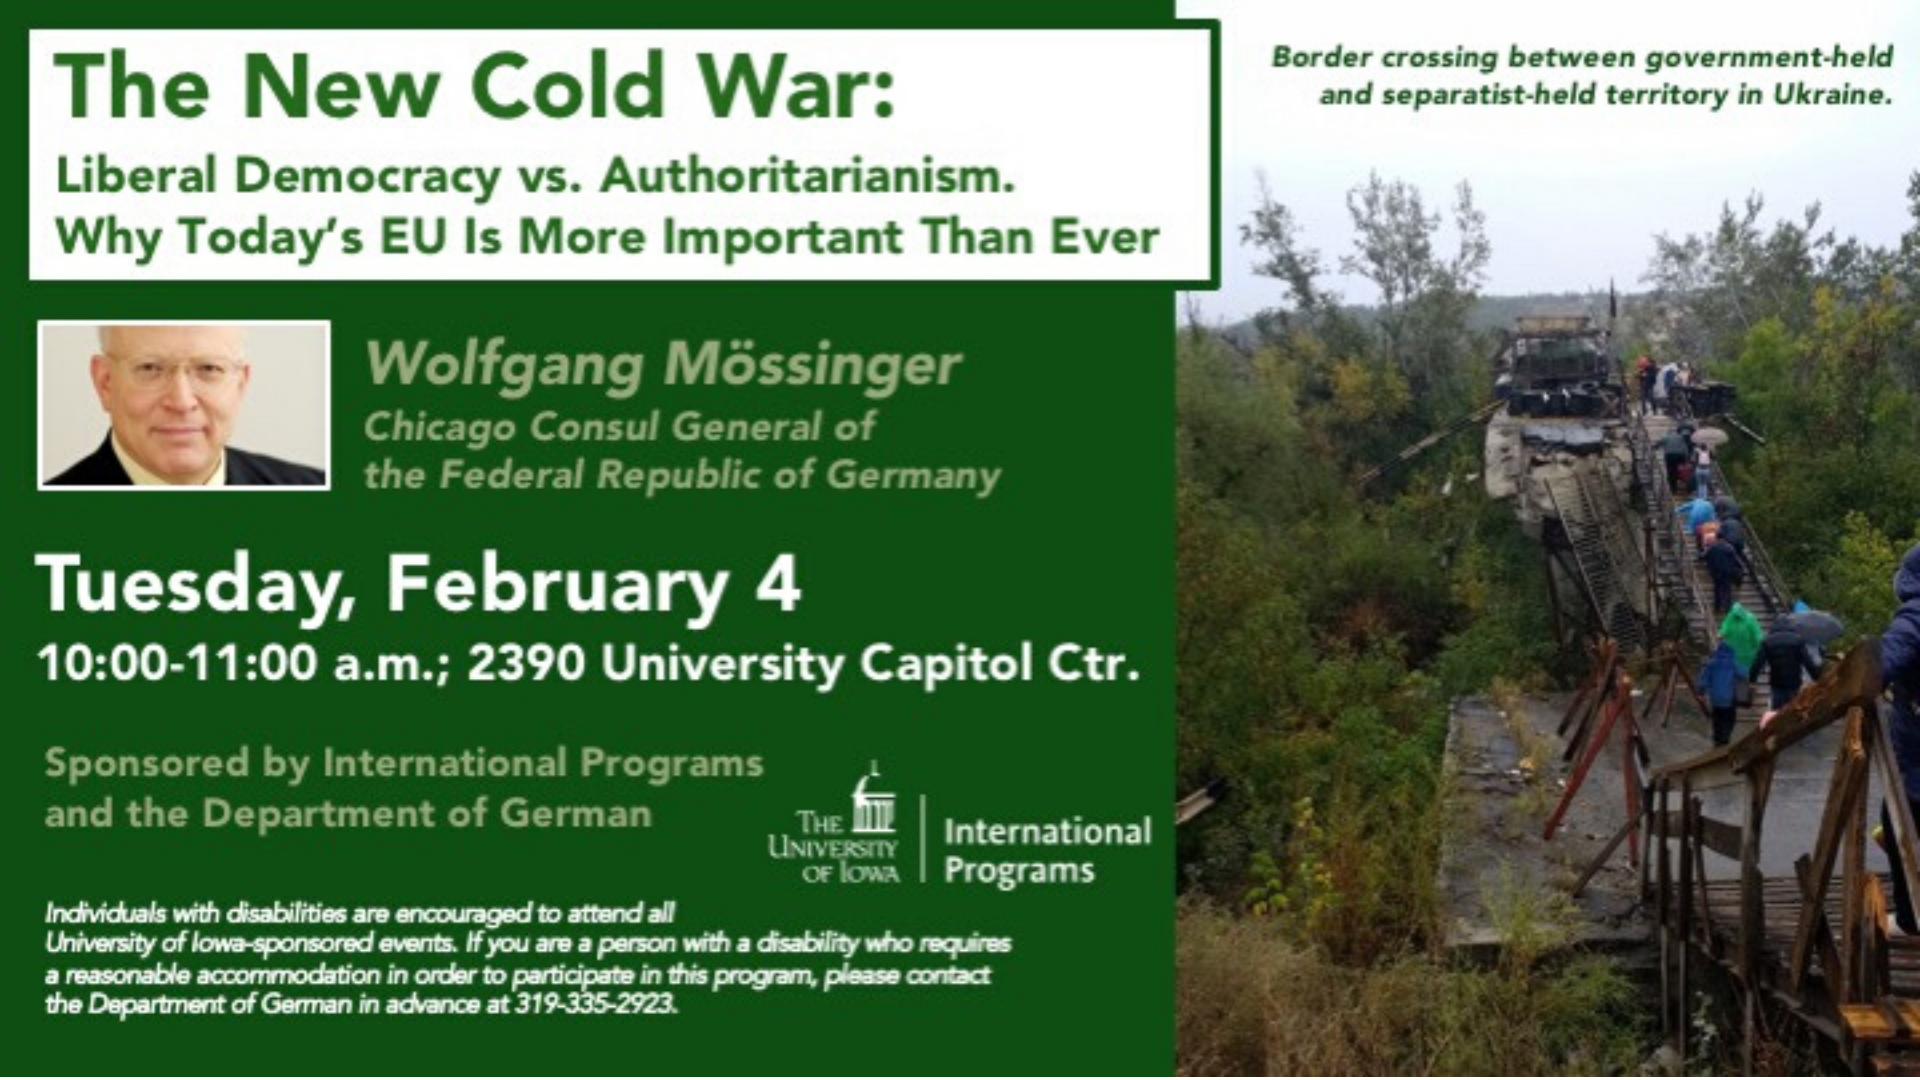 The new cold war Liberal democracy vs. authoritarianism why todays EU is more important than ever. Wolfgang Mössinger Chicago Consul General of the FRG on Tuesday, February 4th 10-11 am 2390 University Capitol Ctr. sponsored by the international programs and the department of german